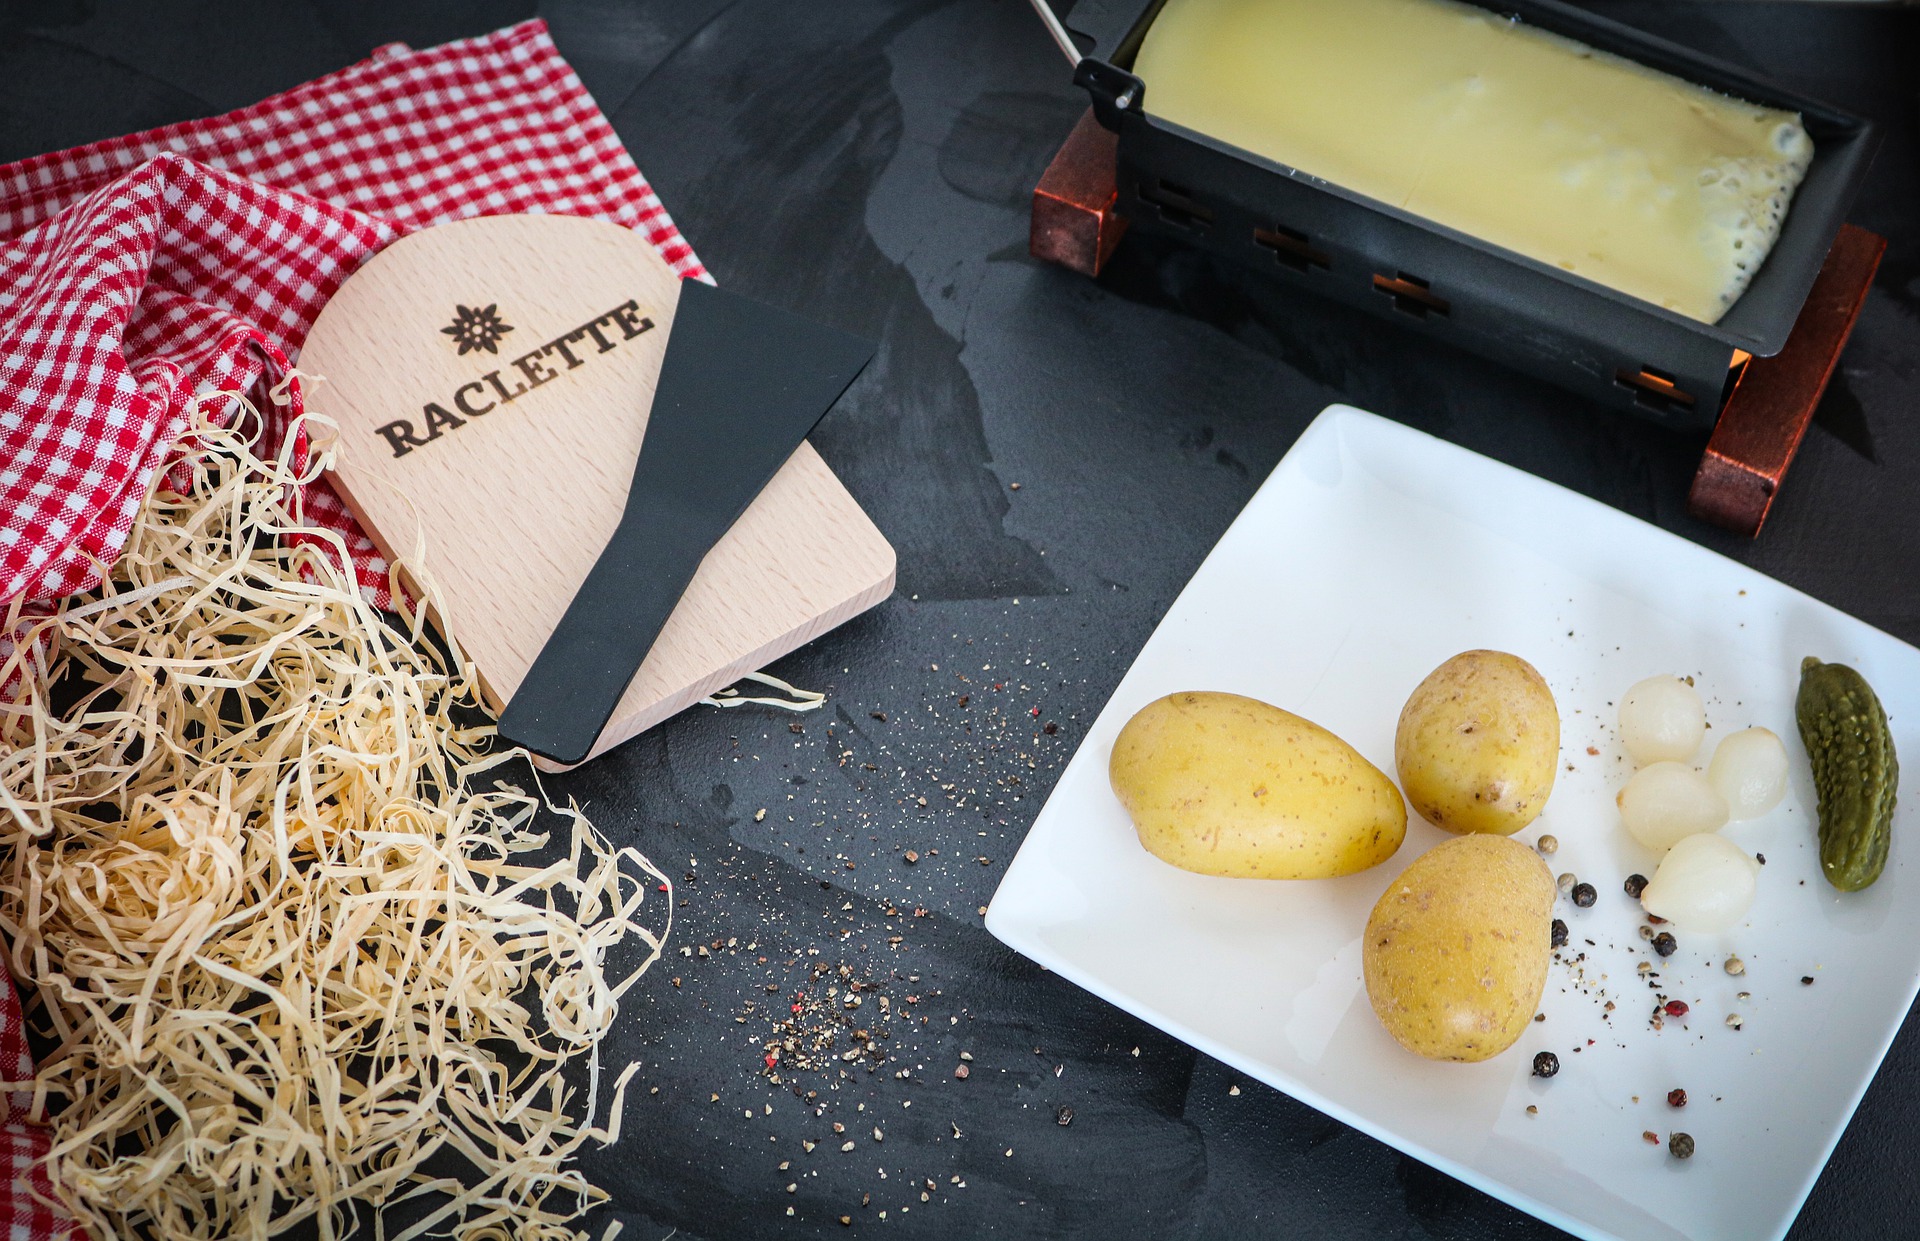 Alpine feeling at home with raclette